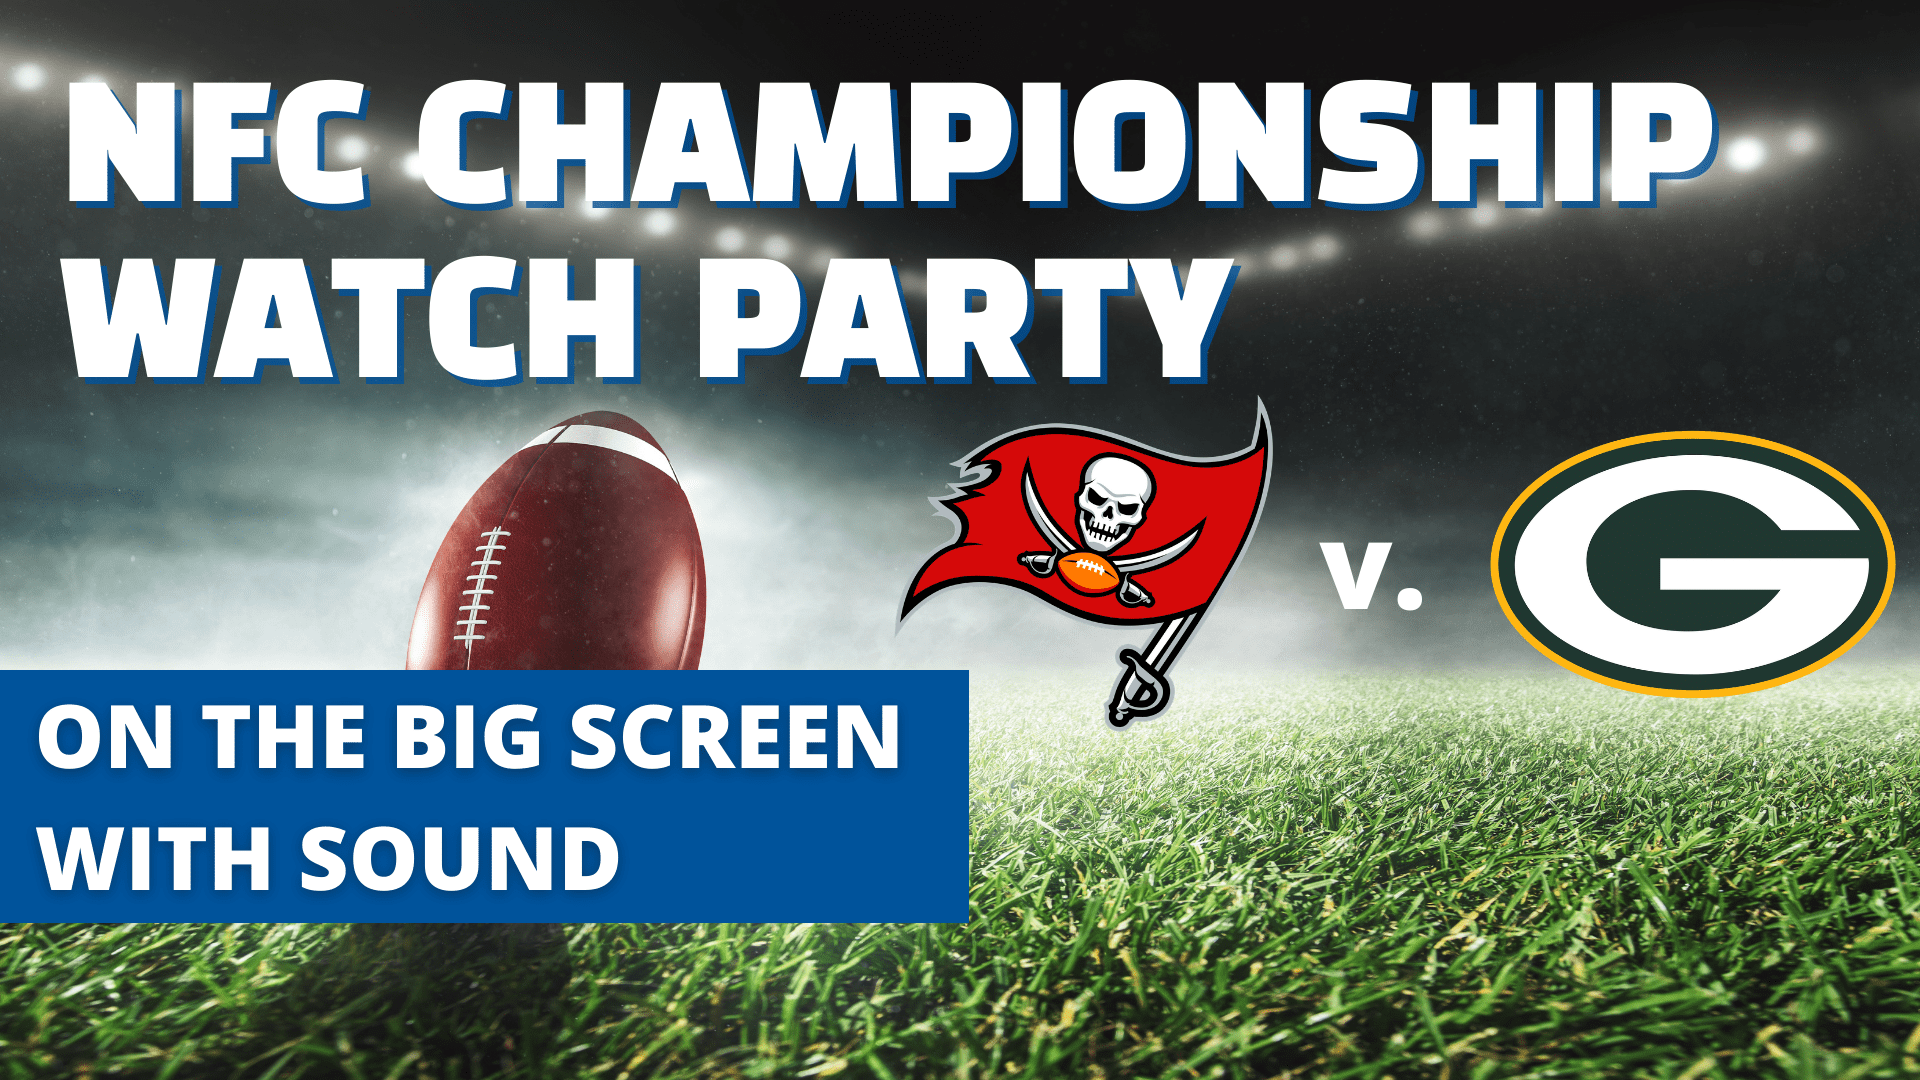 NFC Championship Watch Party - hero